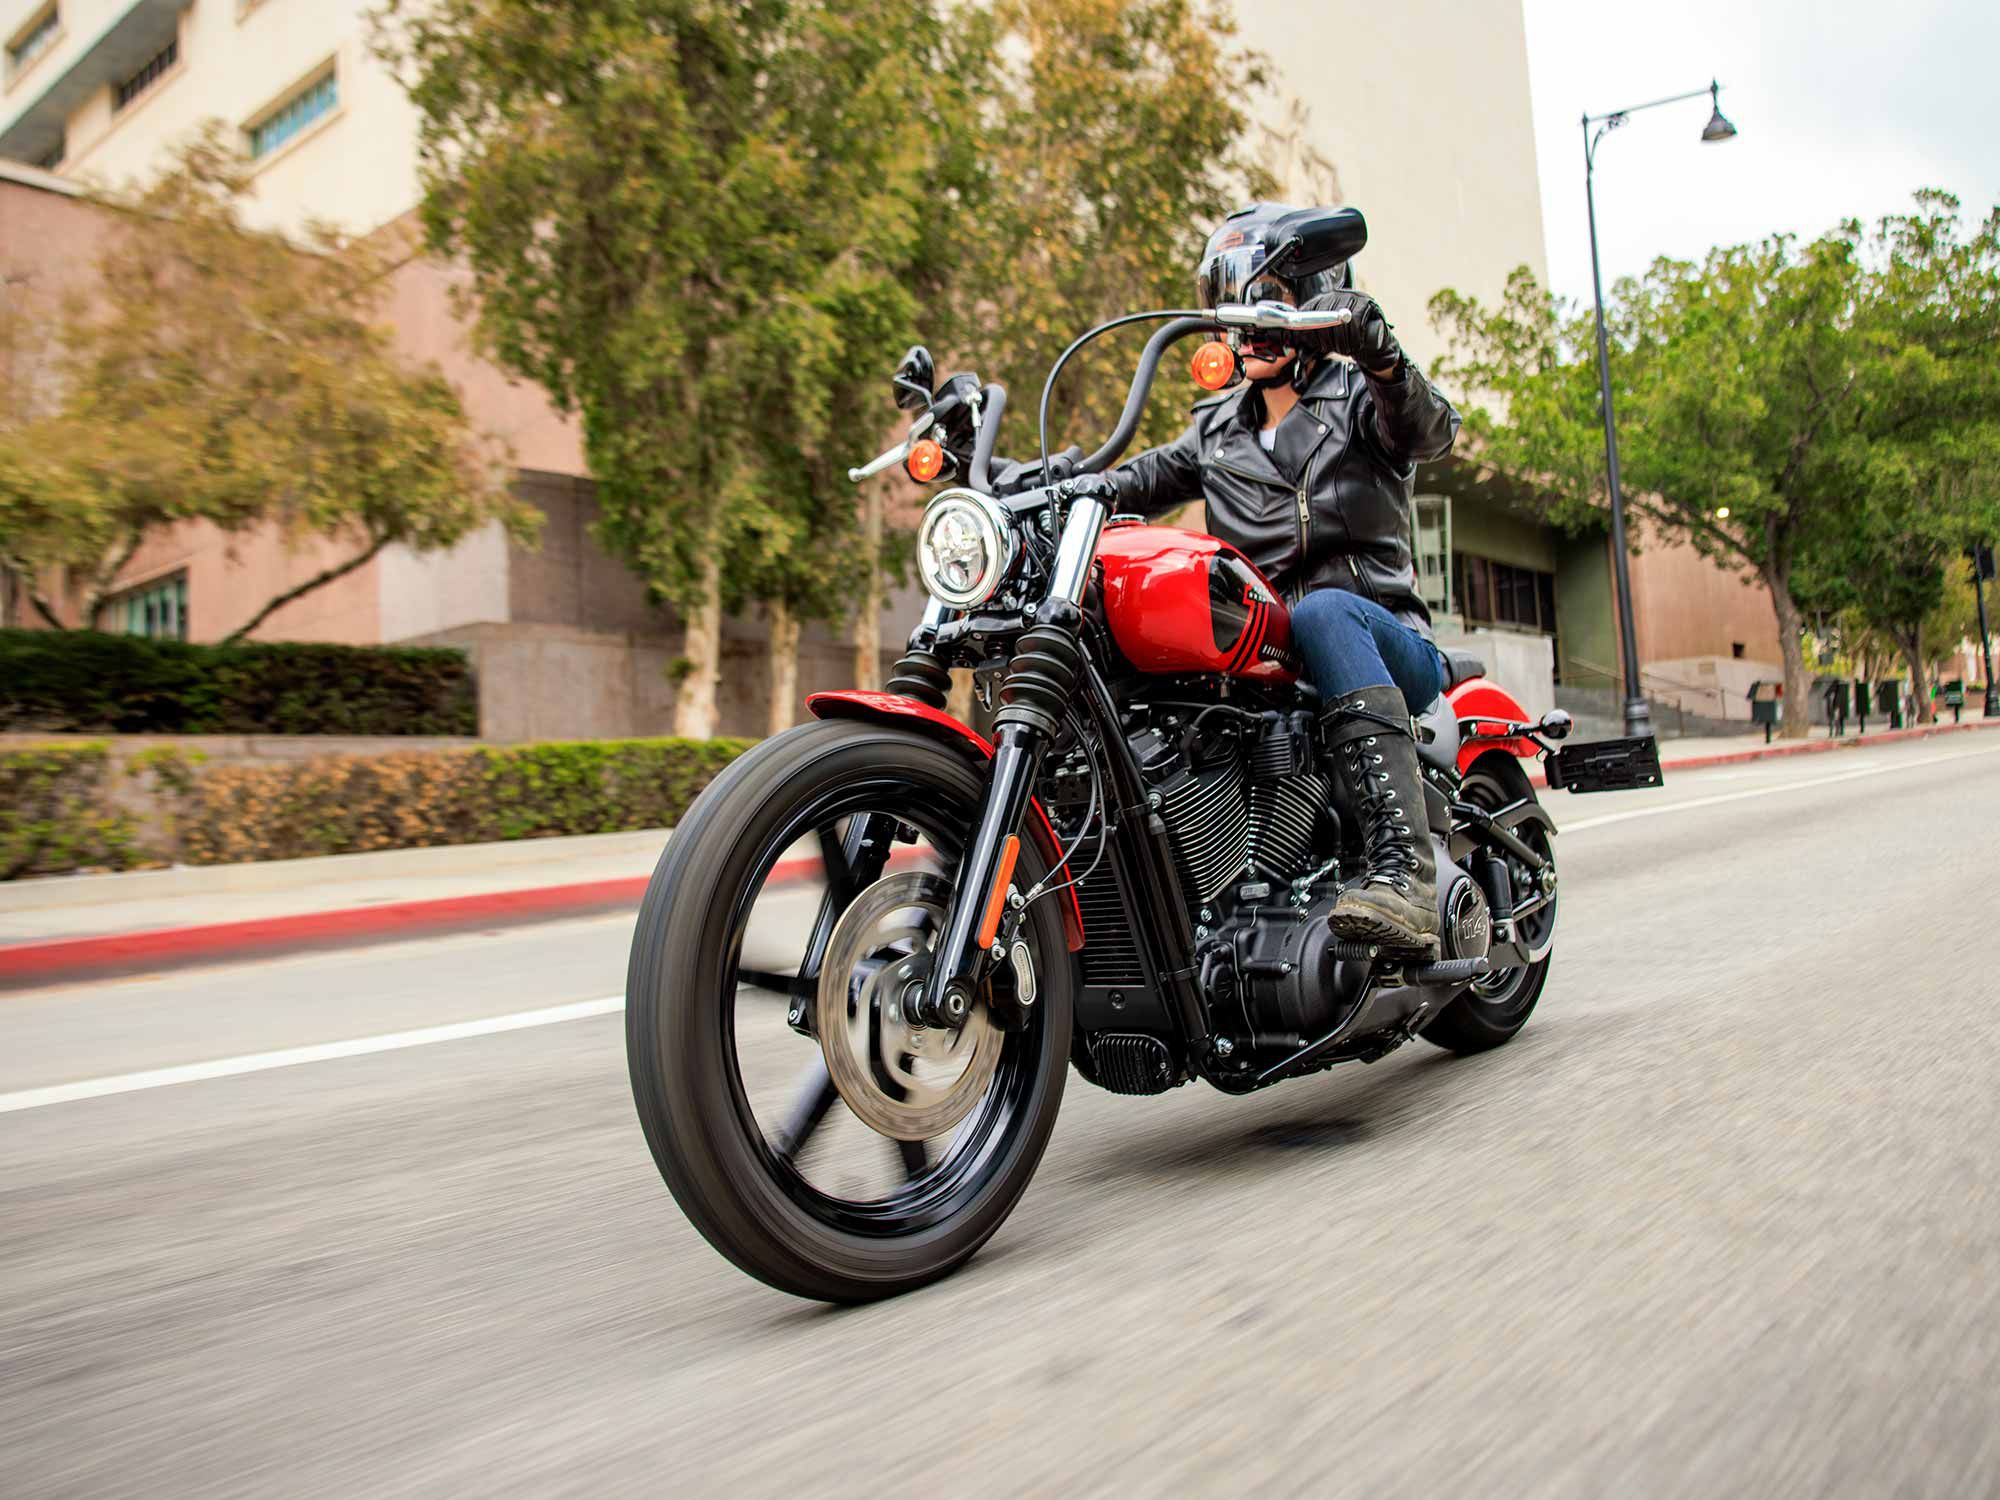 The Street Bob 114 is a blank canvas for customizing.